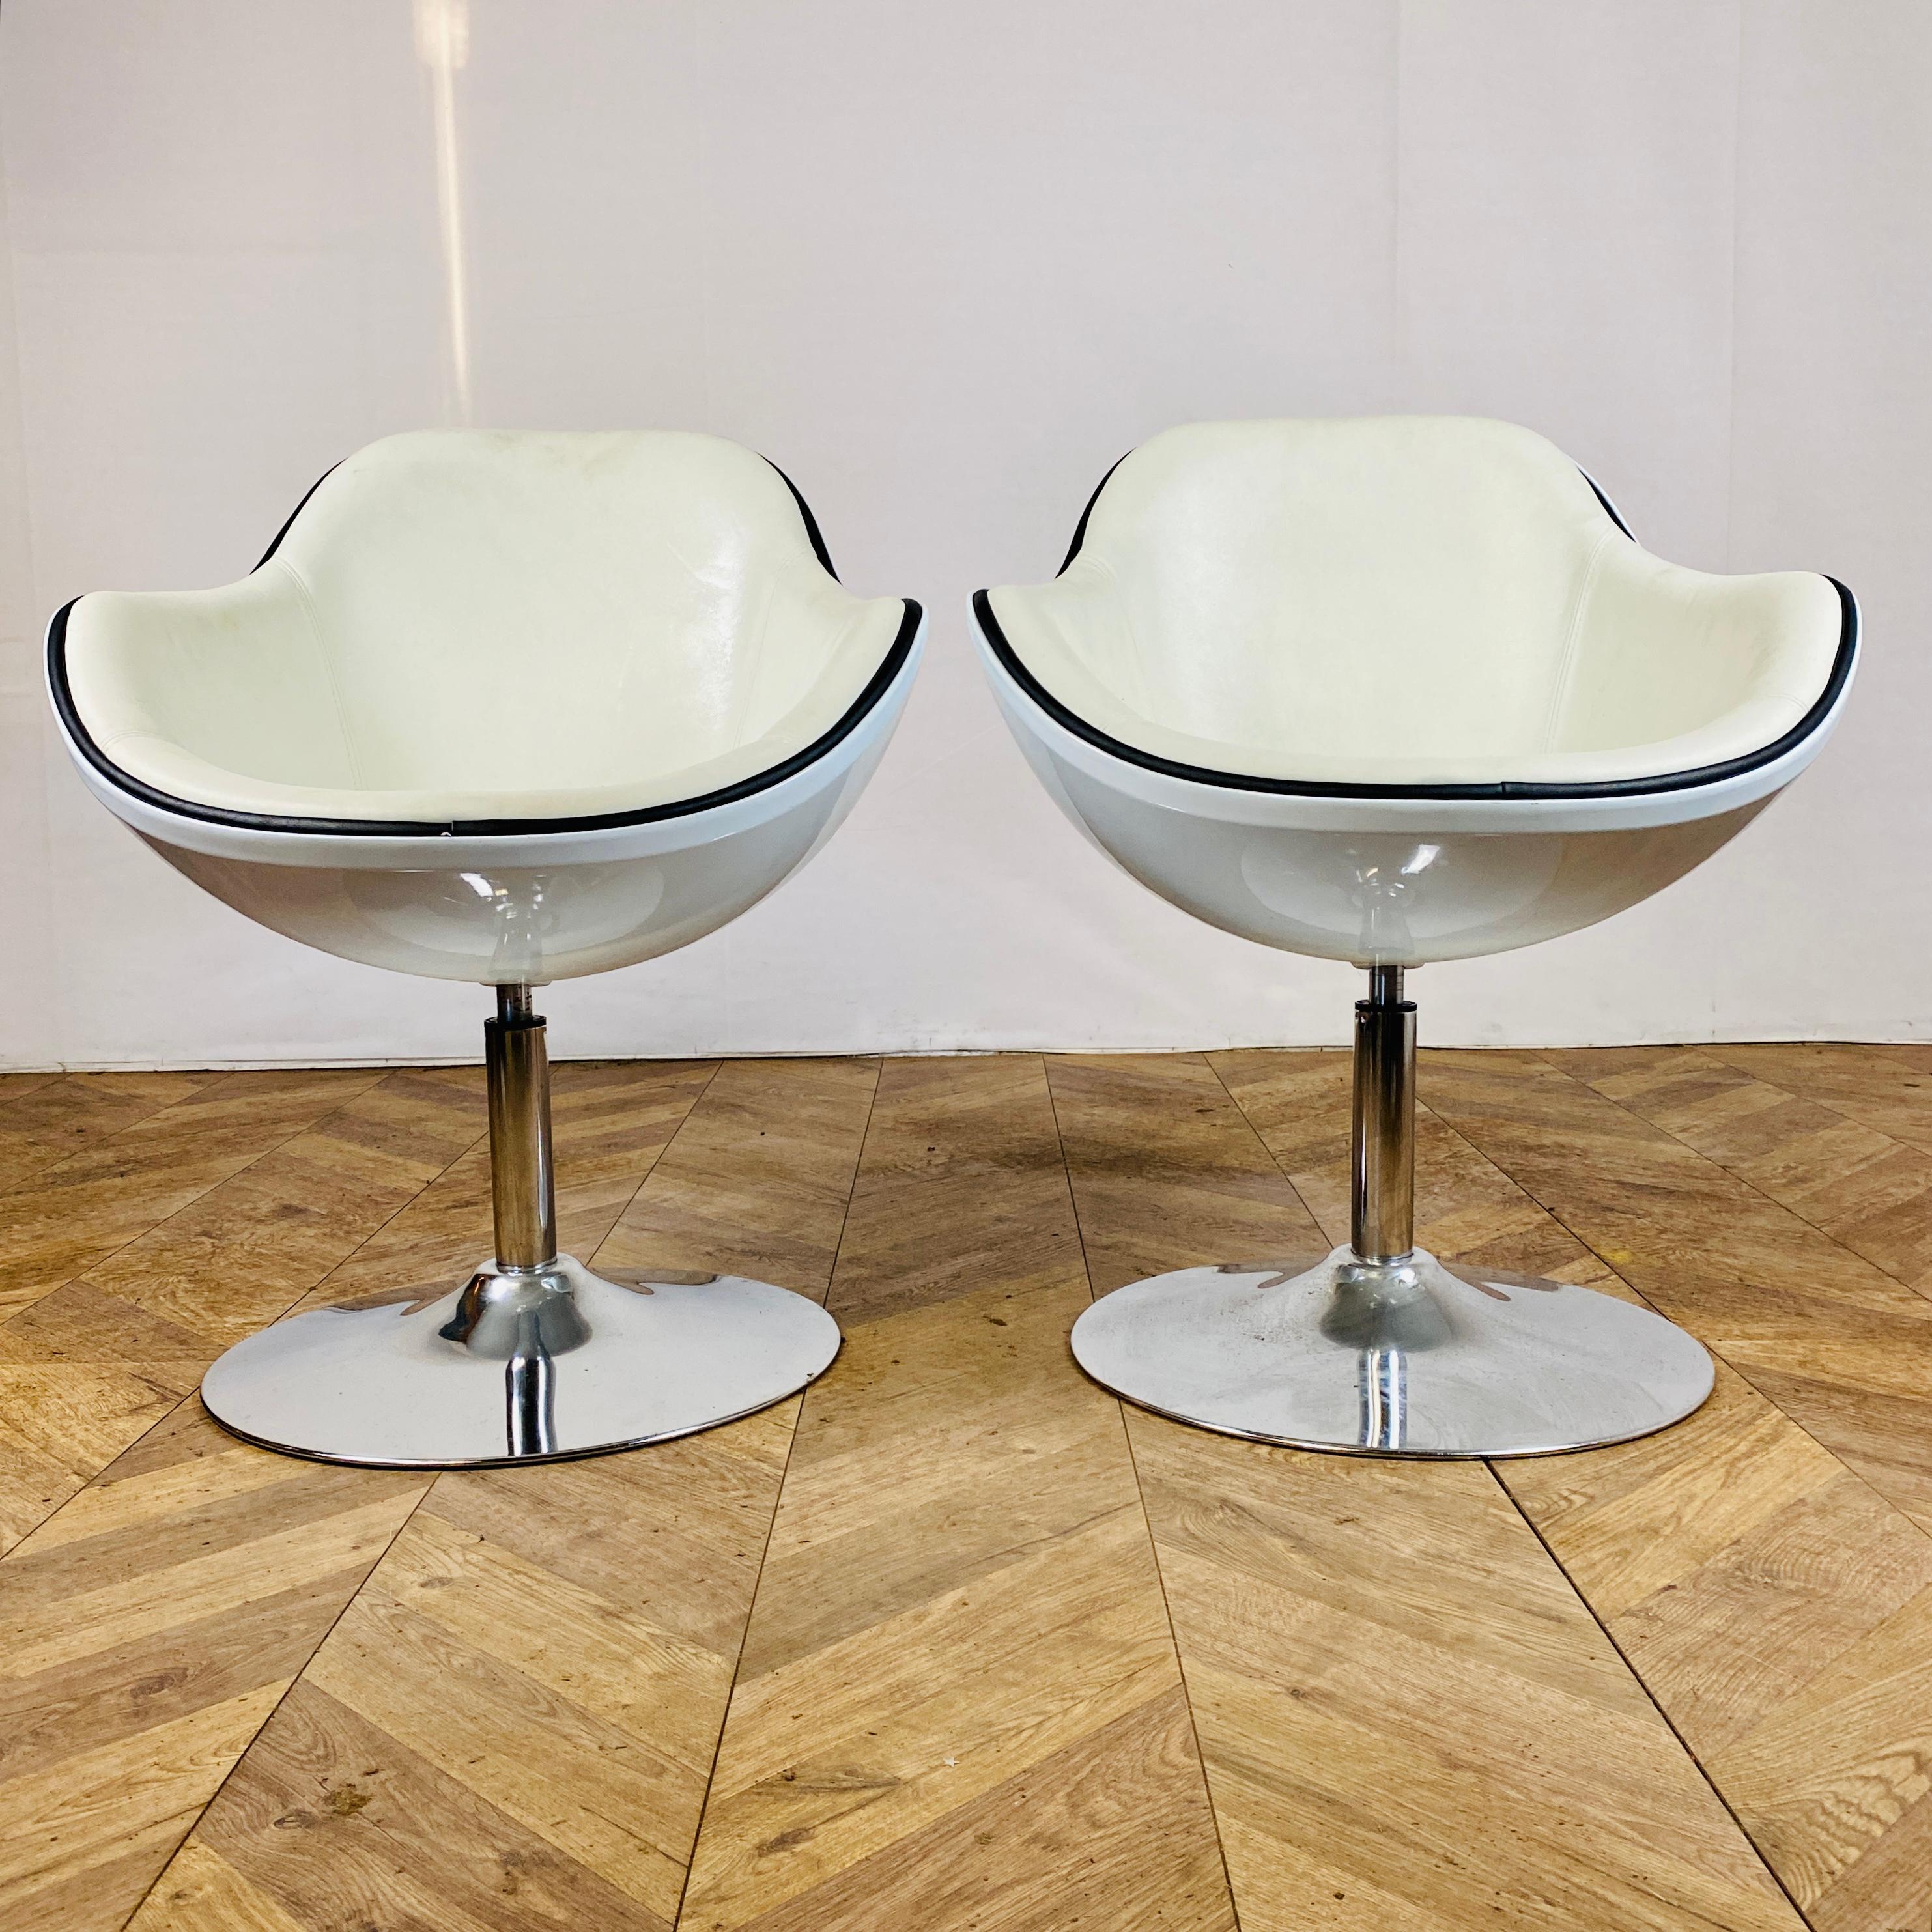 Mid-century vintage set of 2, swivel egg or tub chairs on chrome tulip base.

The set is made from a white leather material and hard shell, which is in good vintage condition, with only slight marks and scuffs to the leather and frames, in-keeping